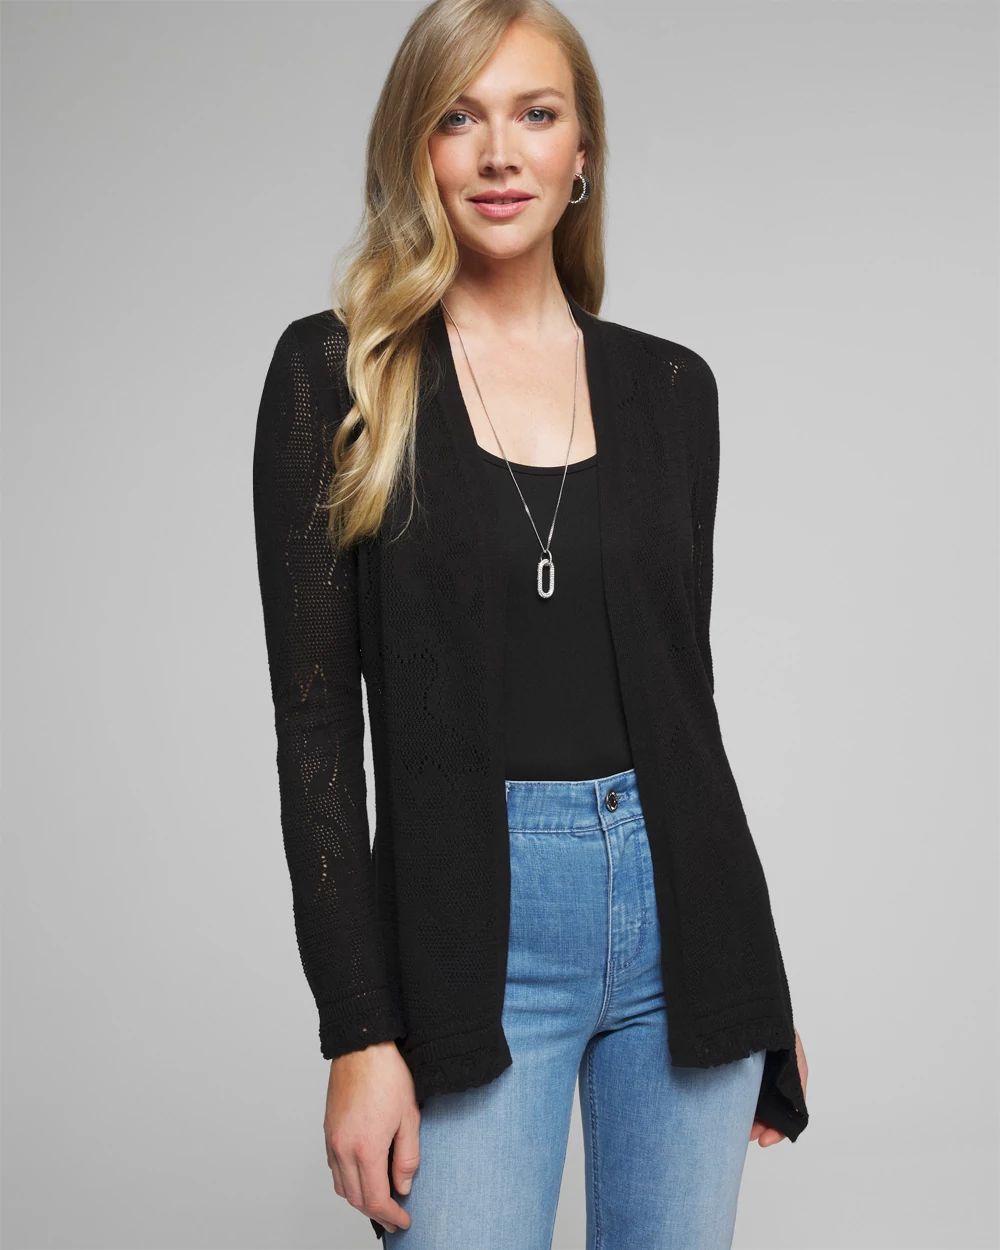 Outlet WHBM Pointelle Fly Away Cardigan